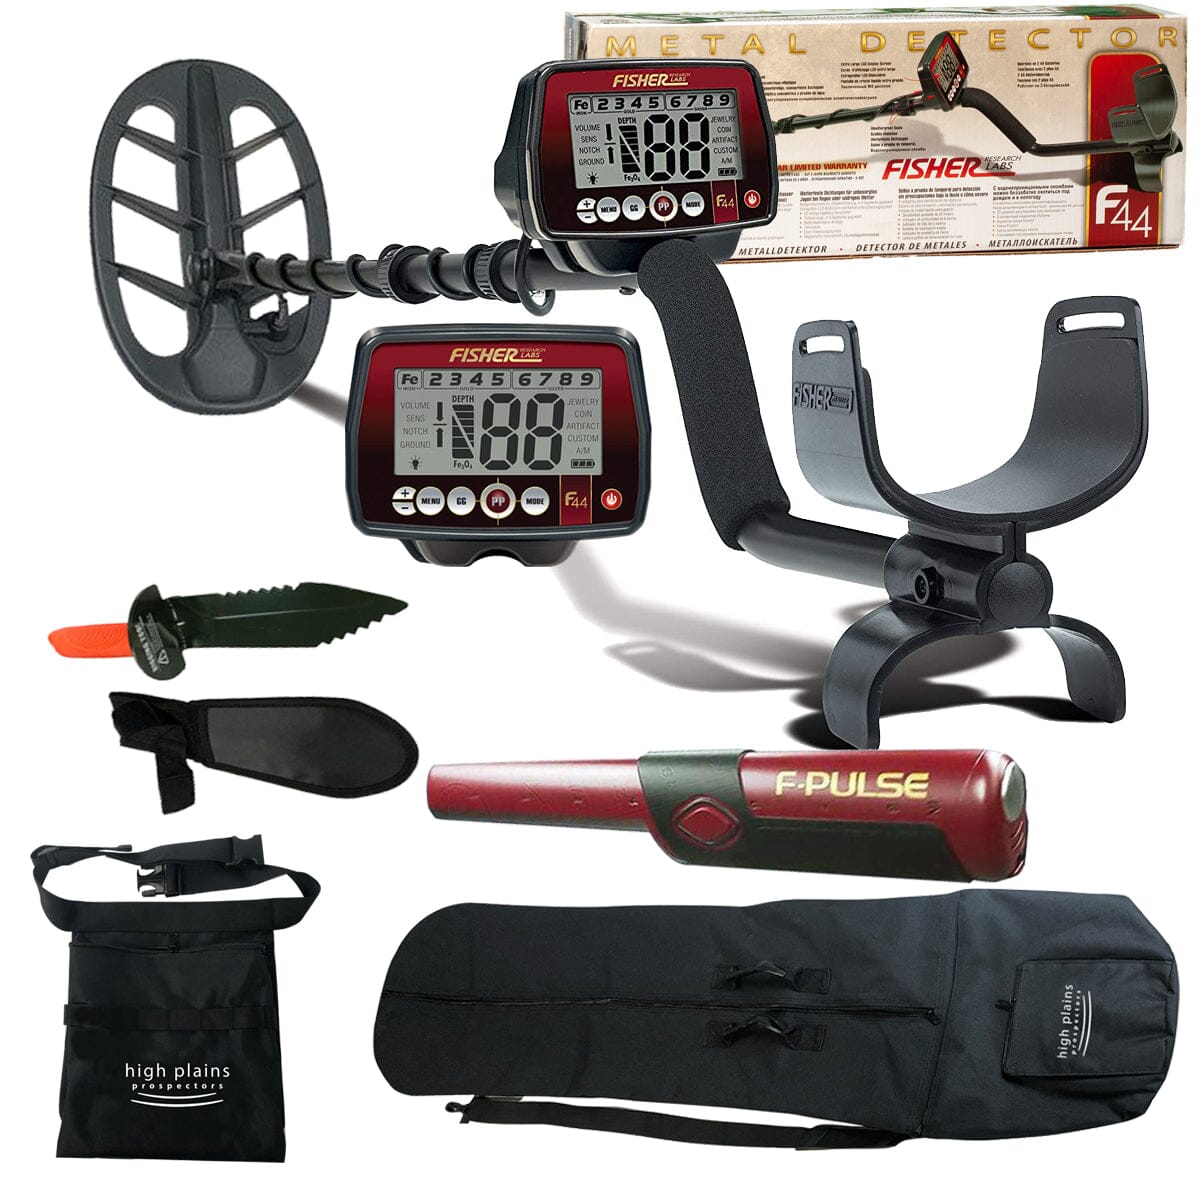 Fisher F44 Metal Detector with 11" DD Coil, F-PULSE Pointer, Treasure-Seeker Bundle